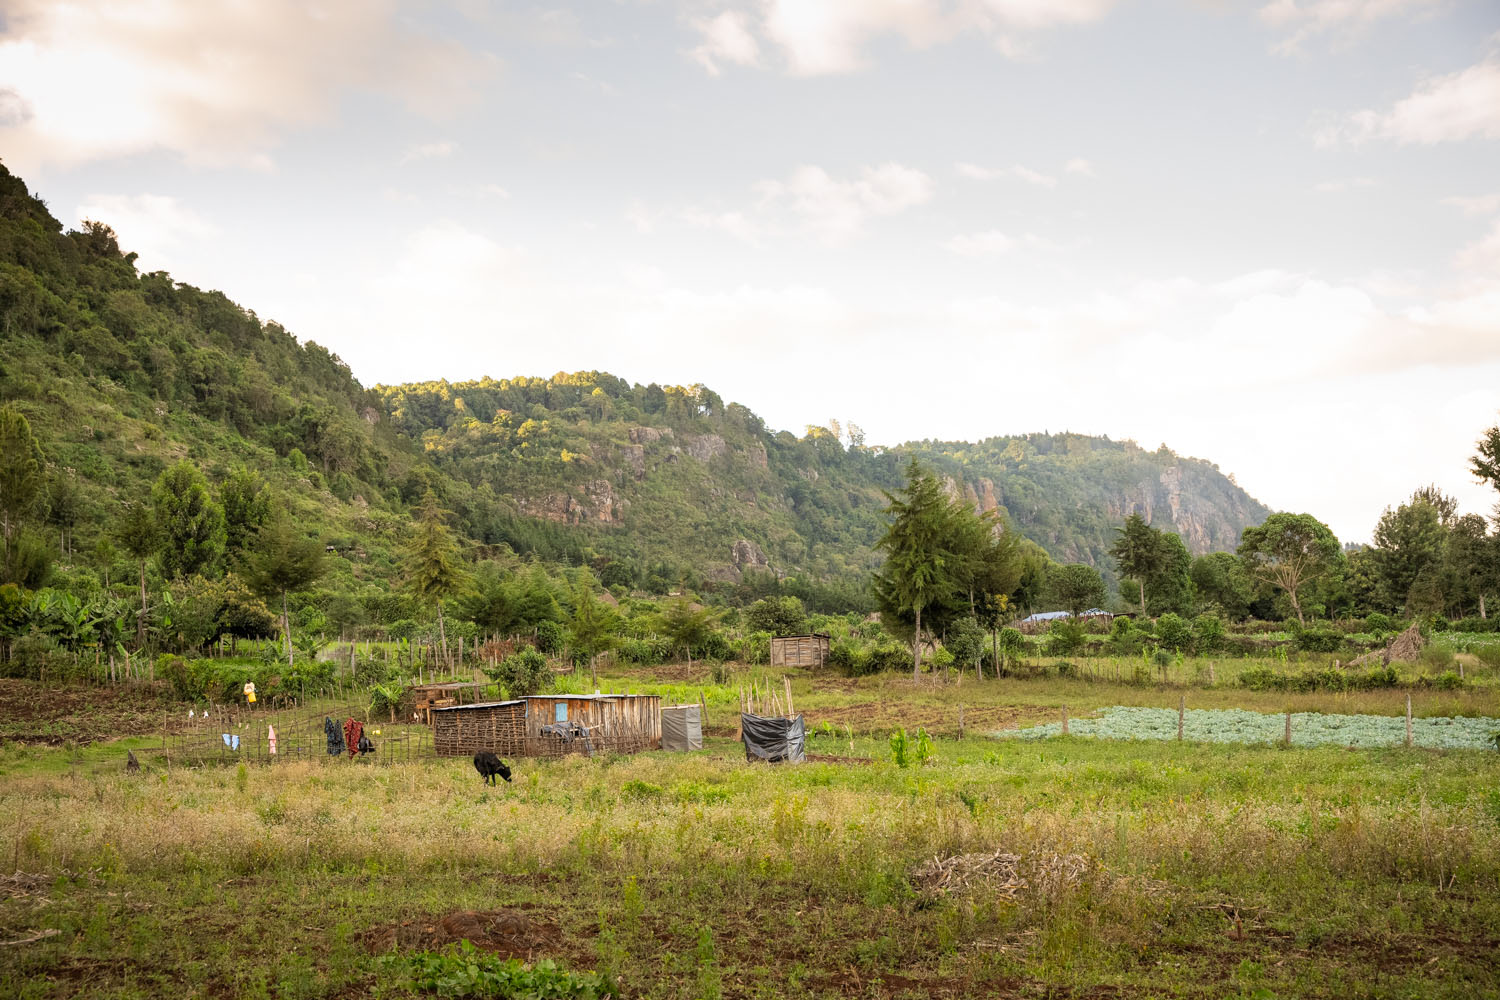 A goat grazes in the distance in front of an animal enclosure beside wide green hills. 